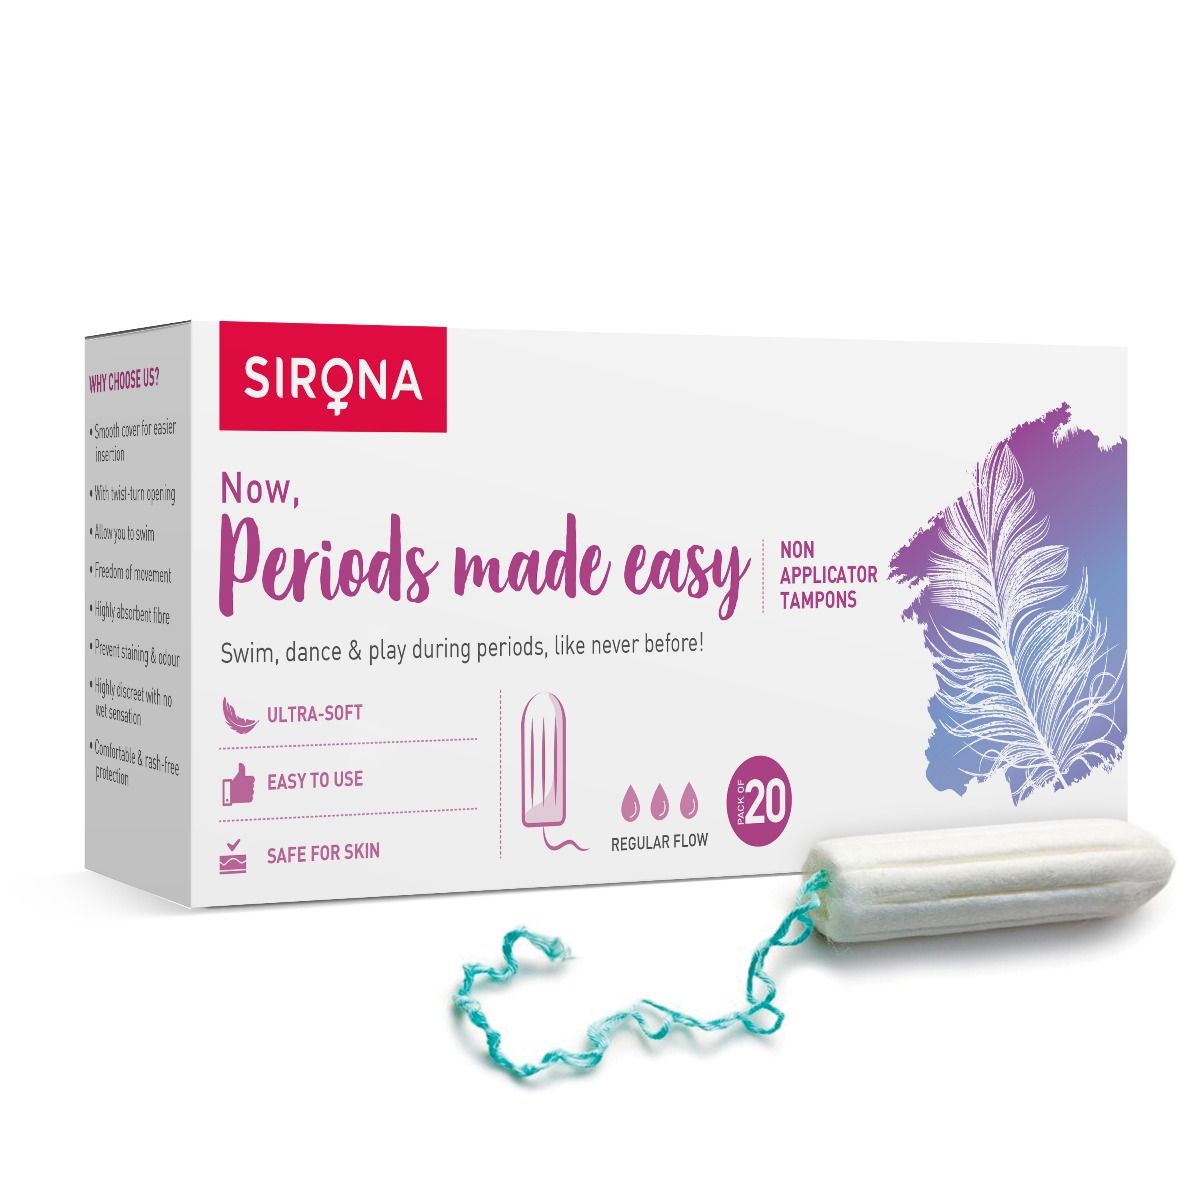 Sirona Now, Periods Made Easy Regular Flow Tampons, 20 Count, Pack of 1 